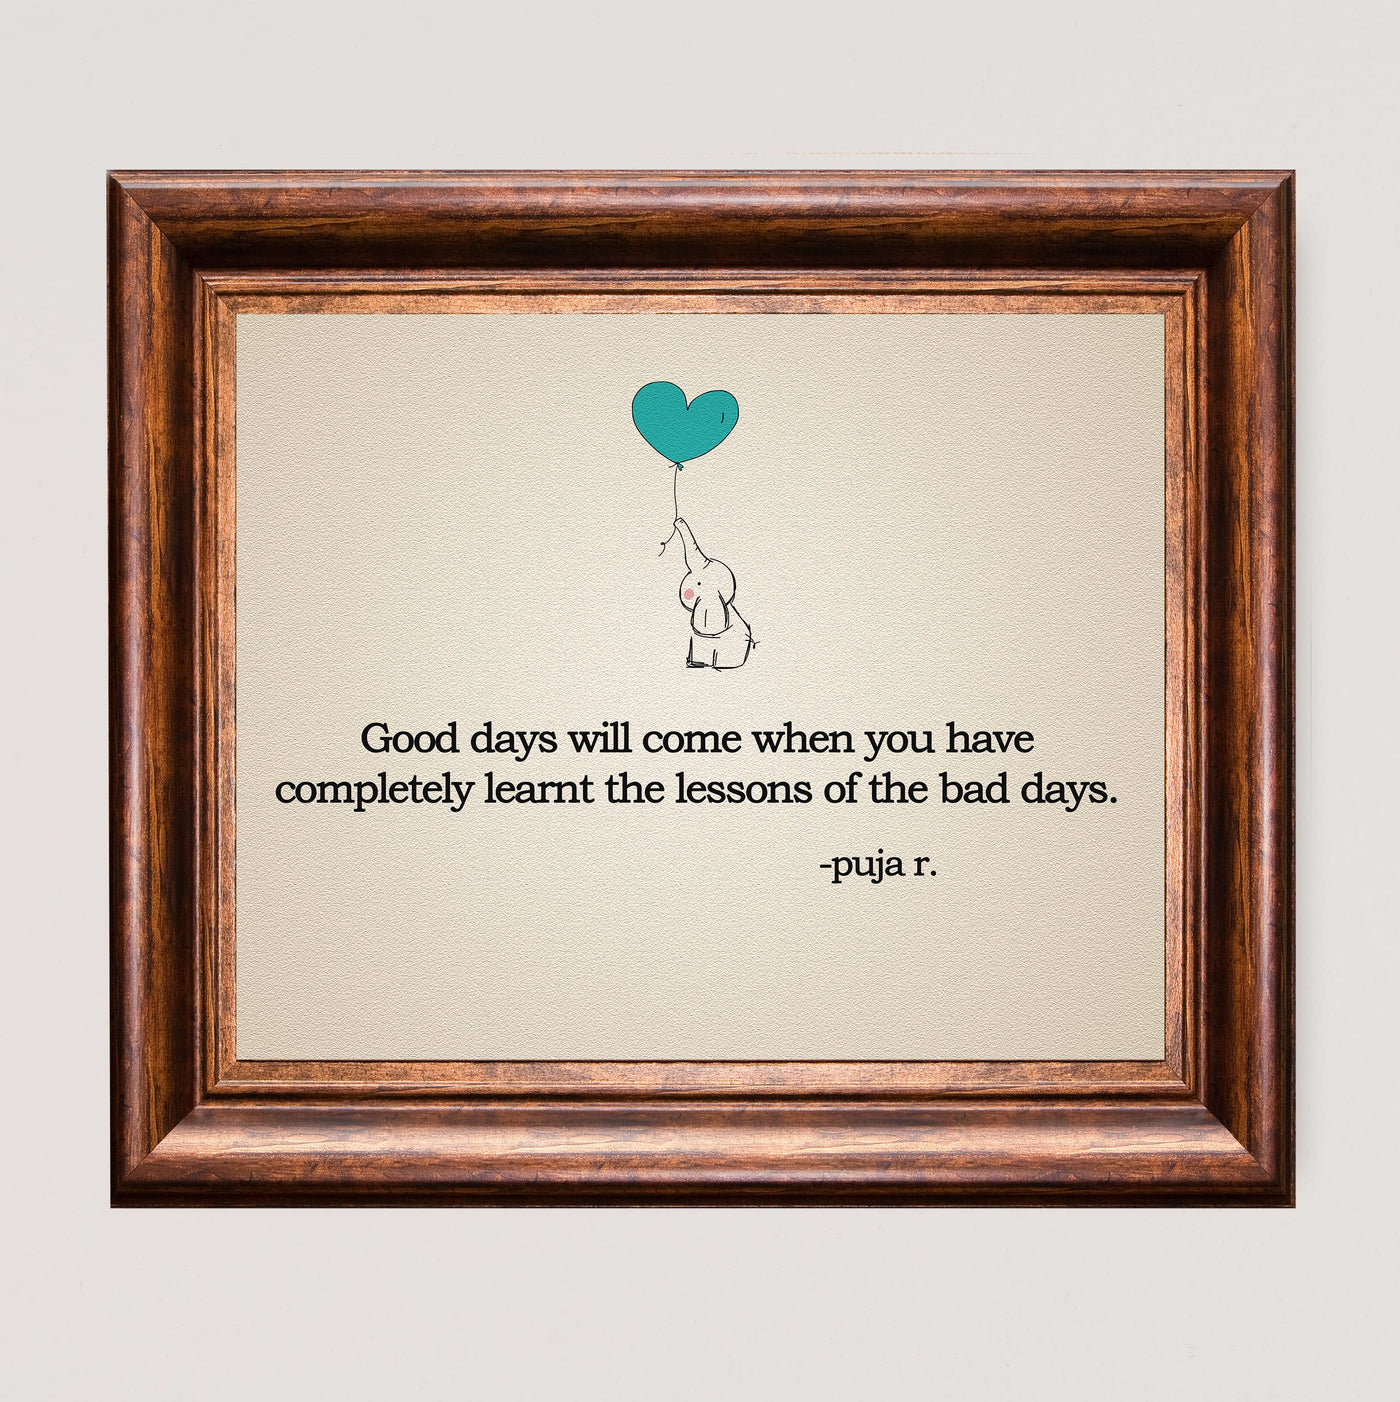 Good Days Will Come- Inspirational Quotes Wall Art -10 x 8" Modern Print w/Elephant & Heart Balloon Picture -Ready to Frame. Motivational Home-Office-School Decor. Great Life Lesson & Gift!